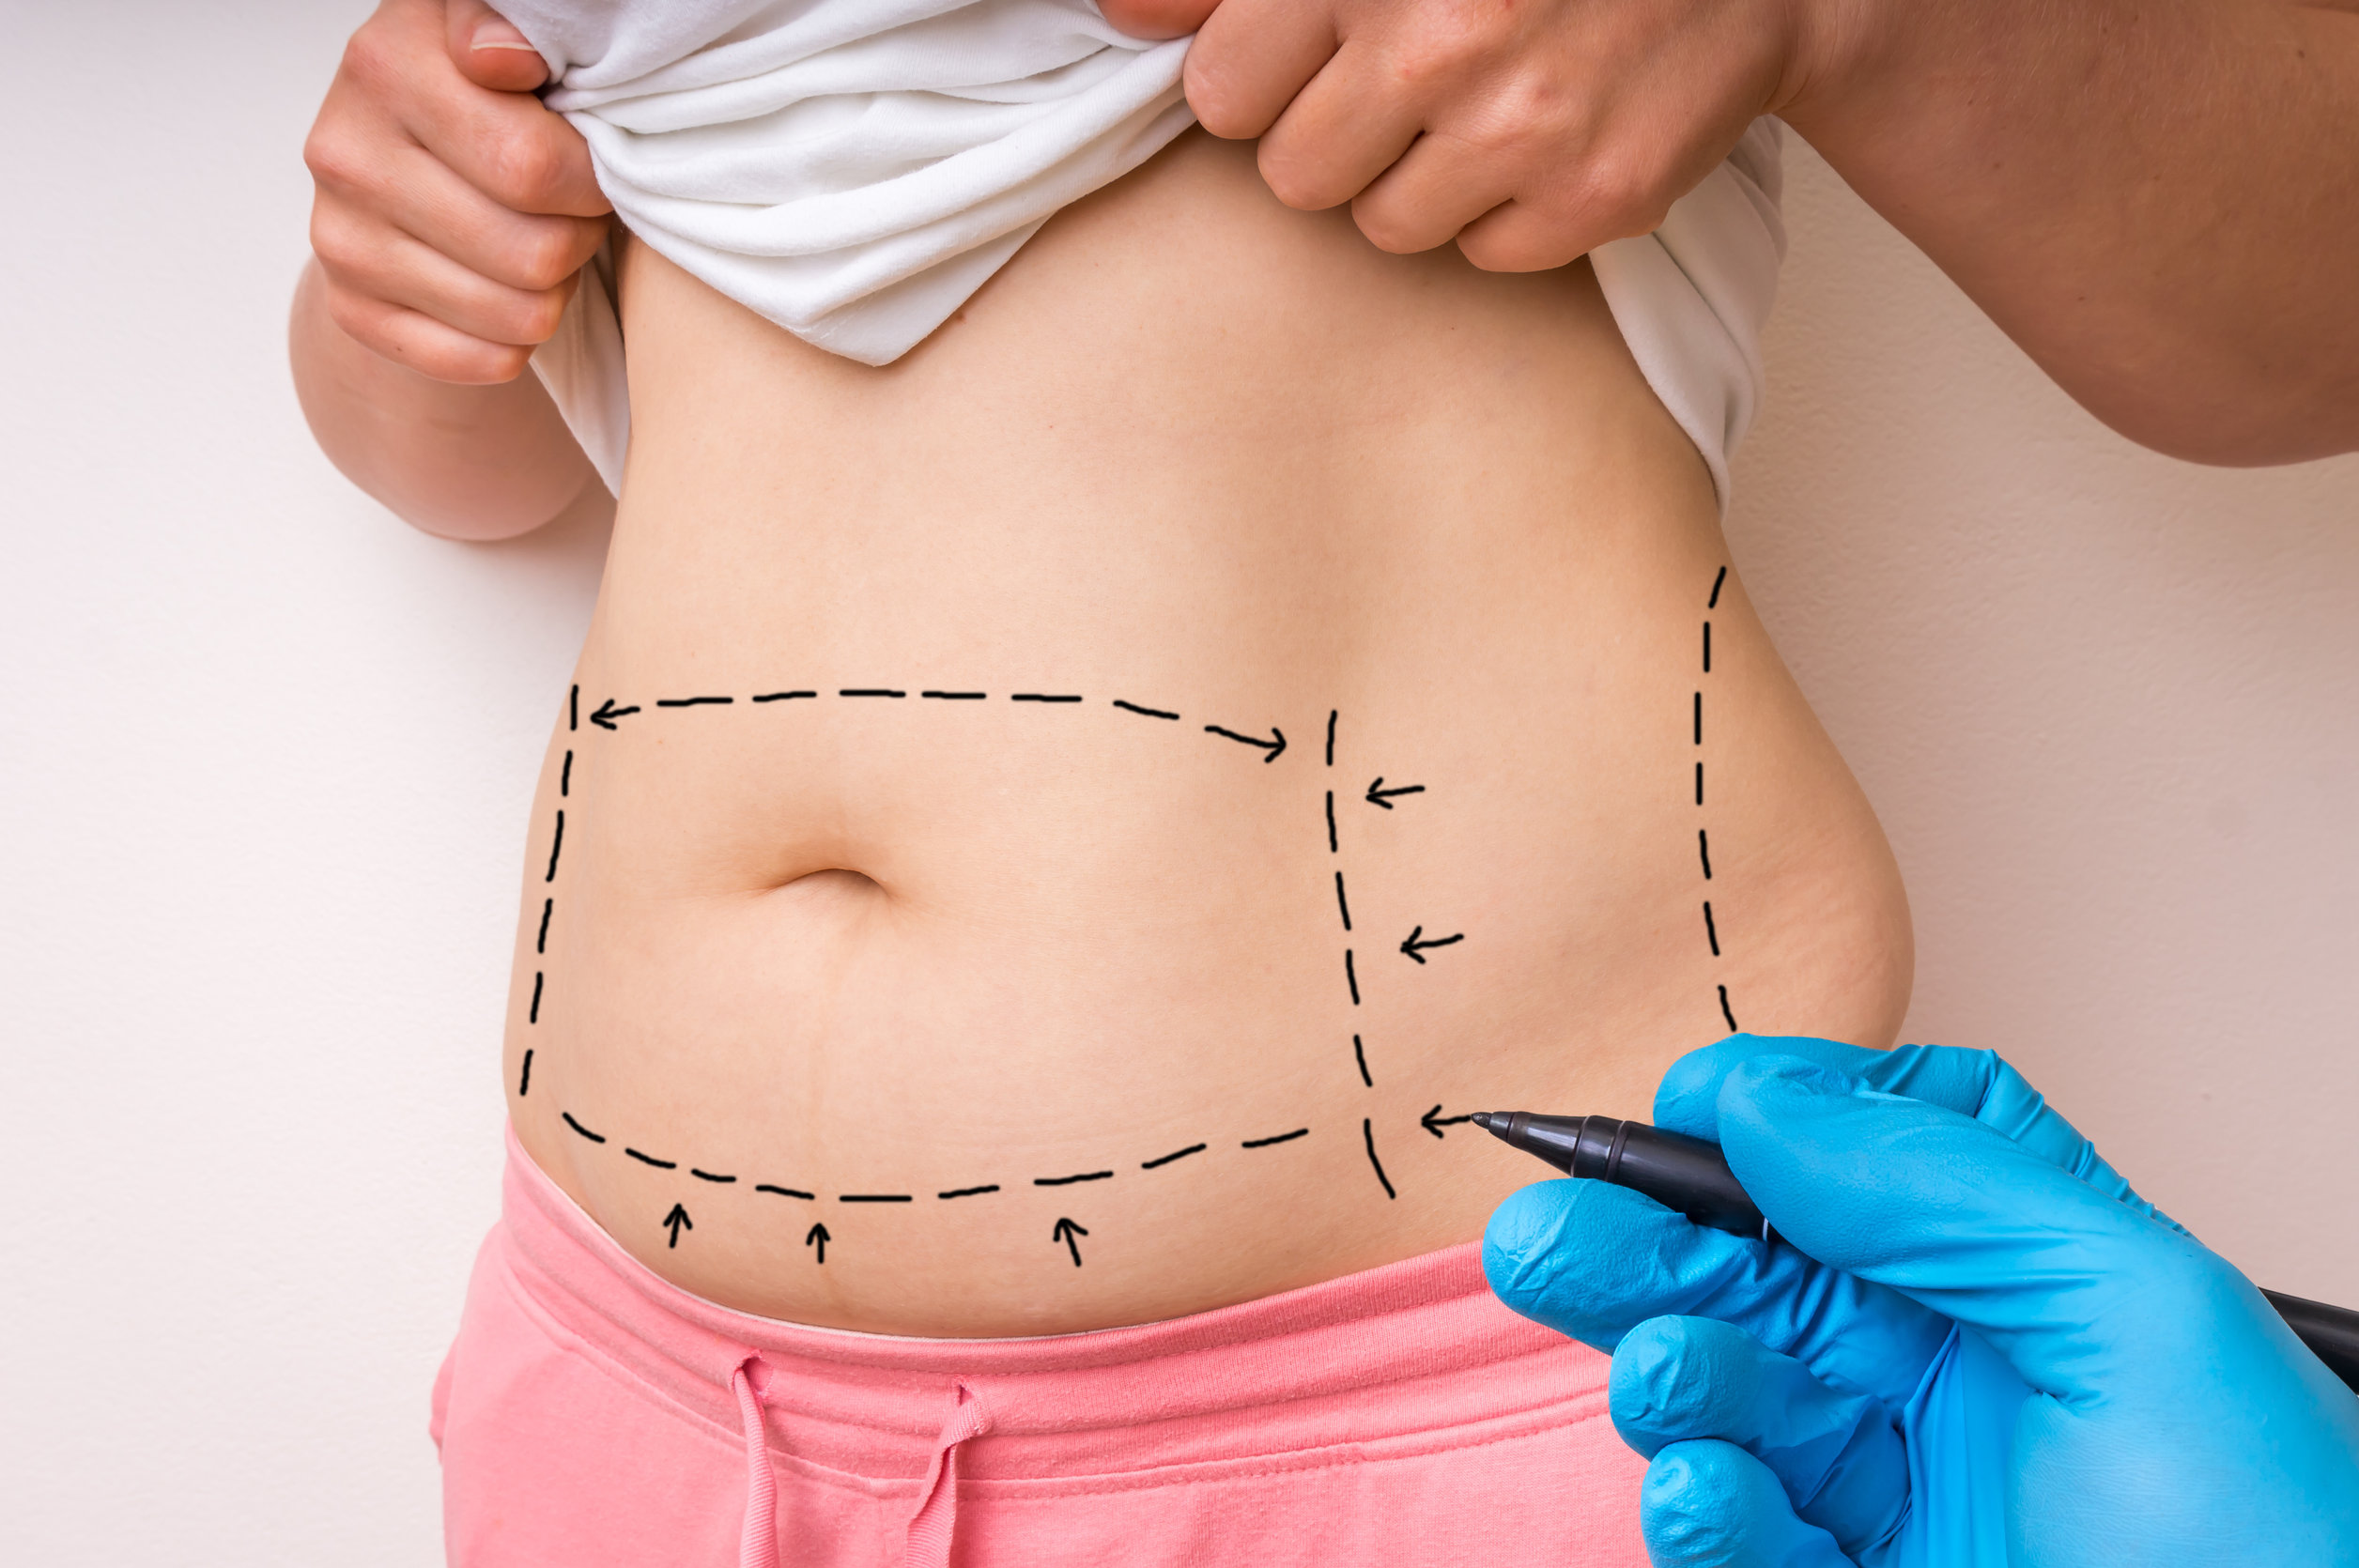 Liposuction (Body Contouring by Unwanted Fats Removal)